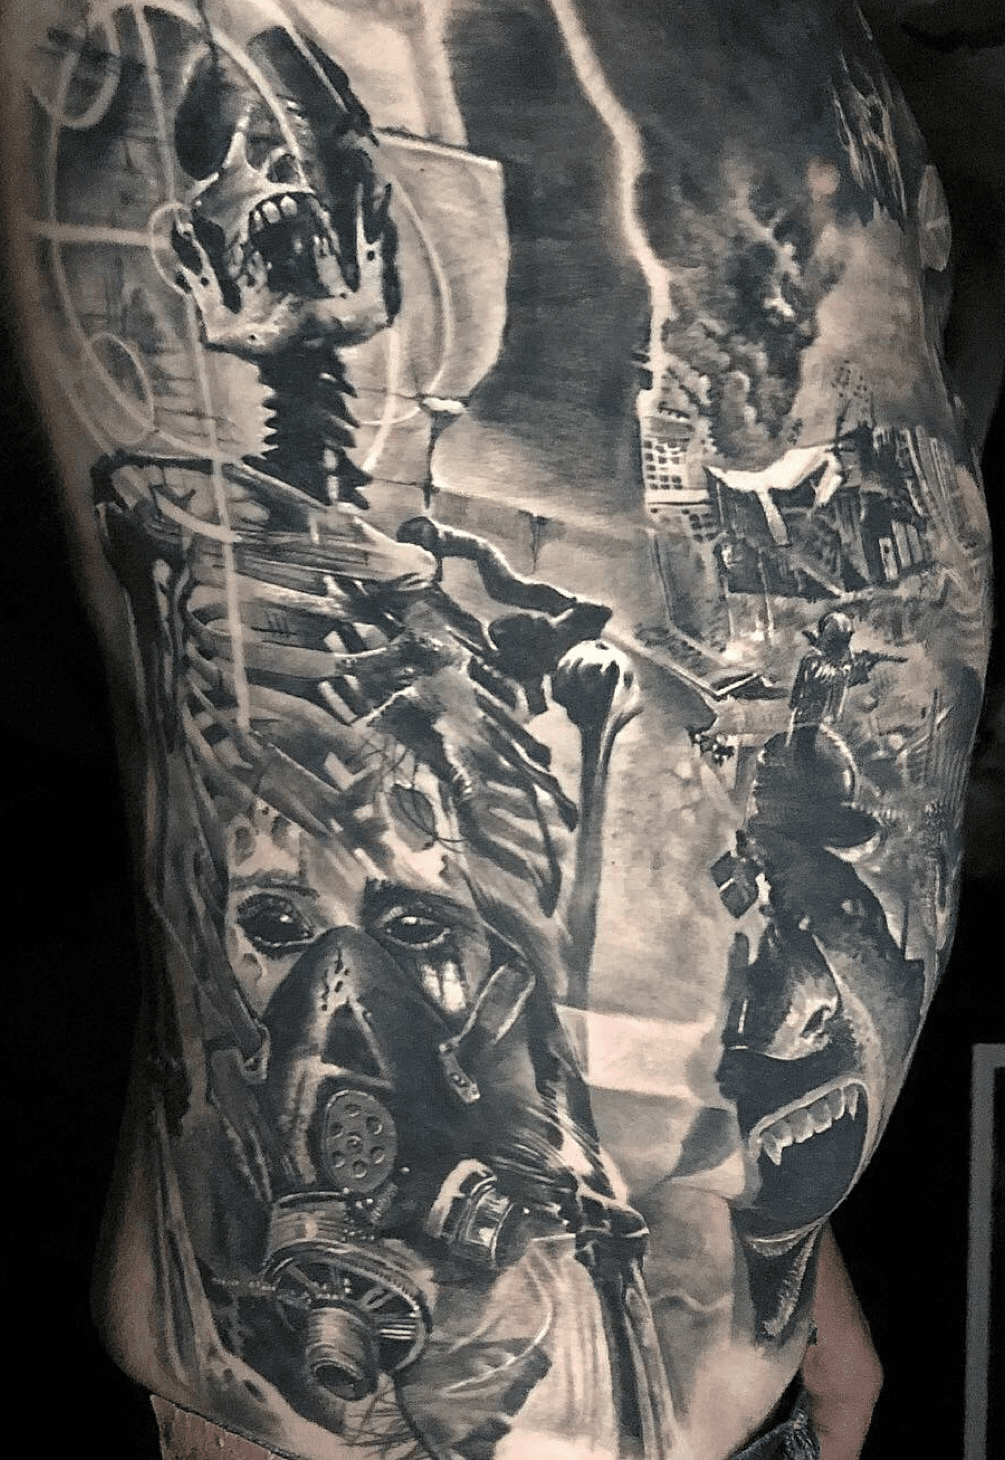 Tattoo uploaded by Tat2Dave13  DLHughley celebrities celebritytattoo  actor comedian  Tattoodo